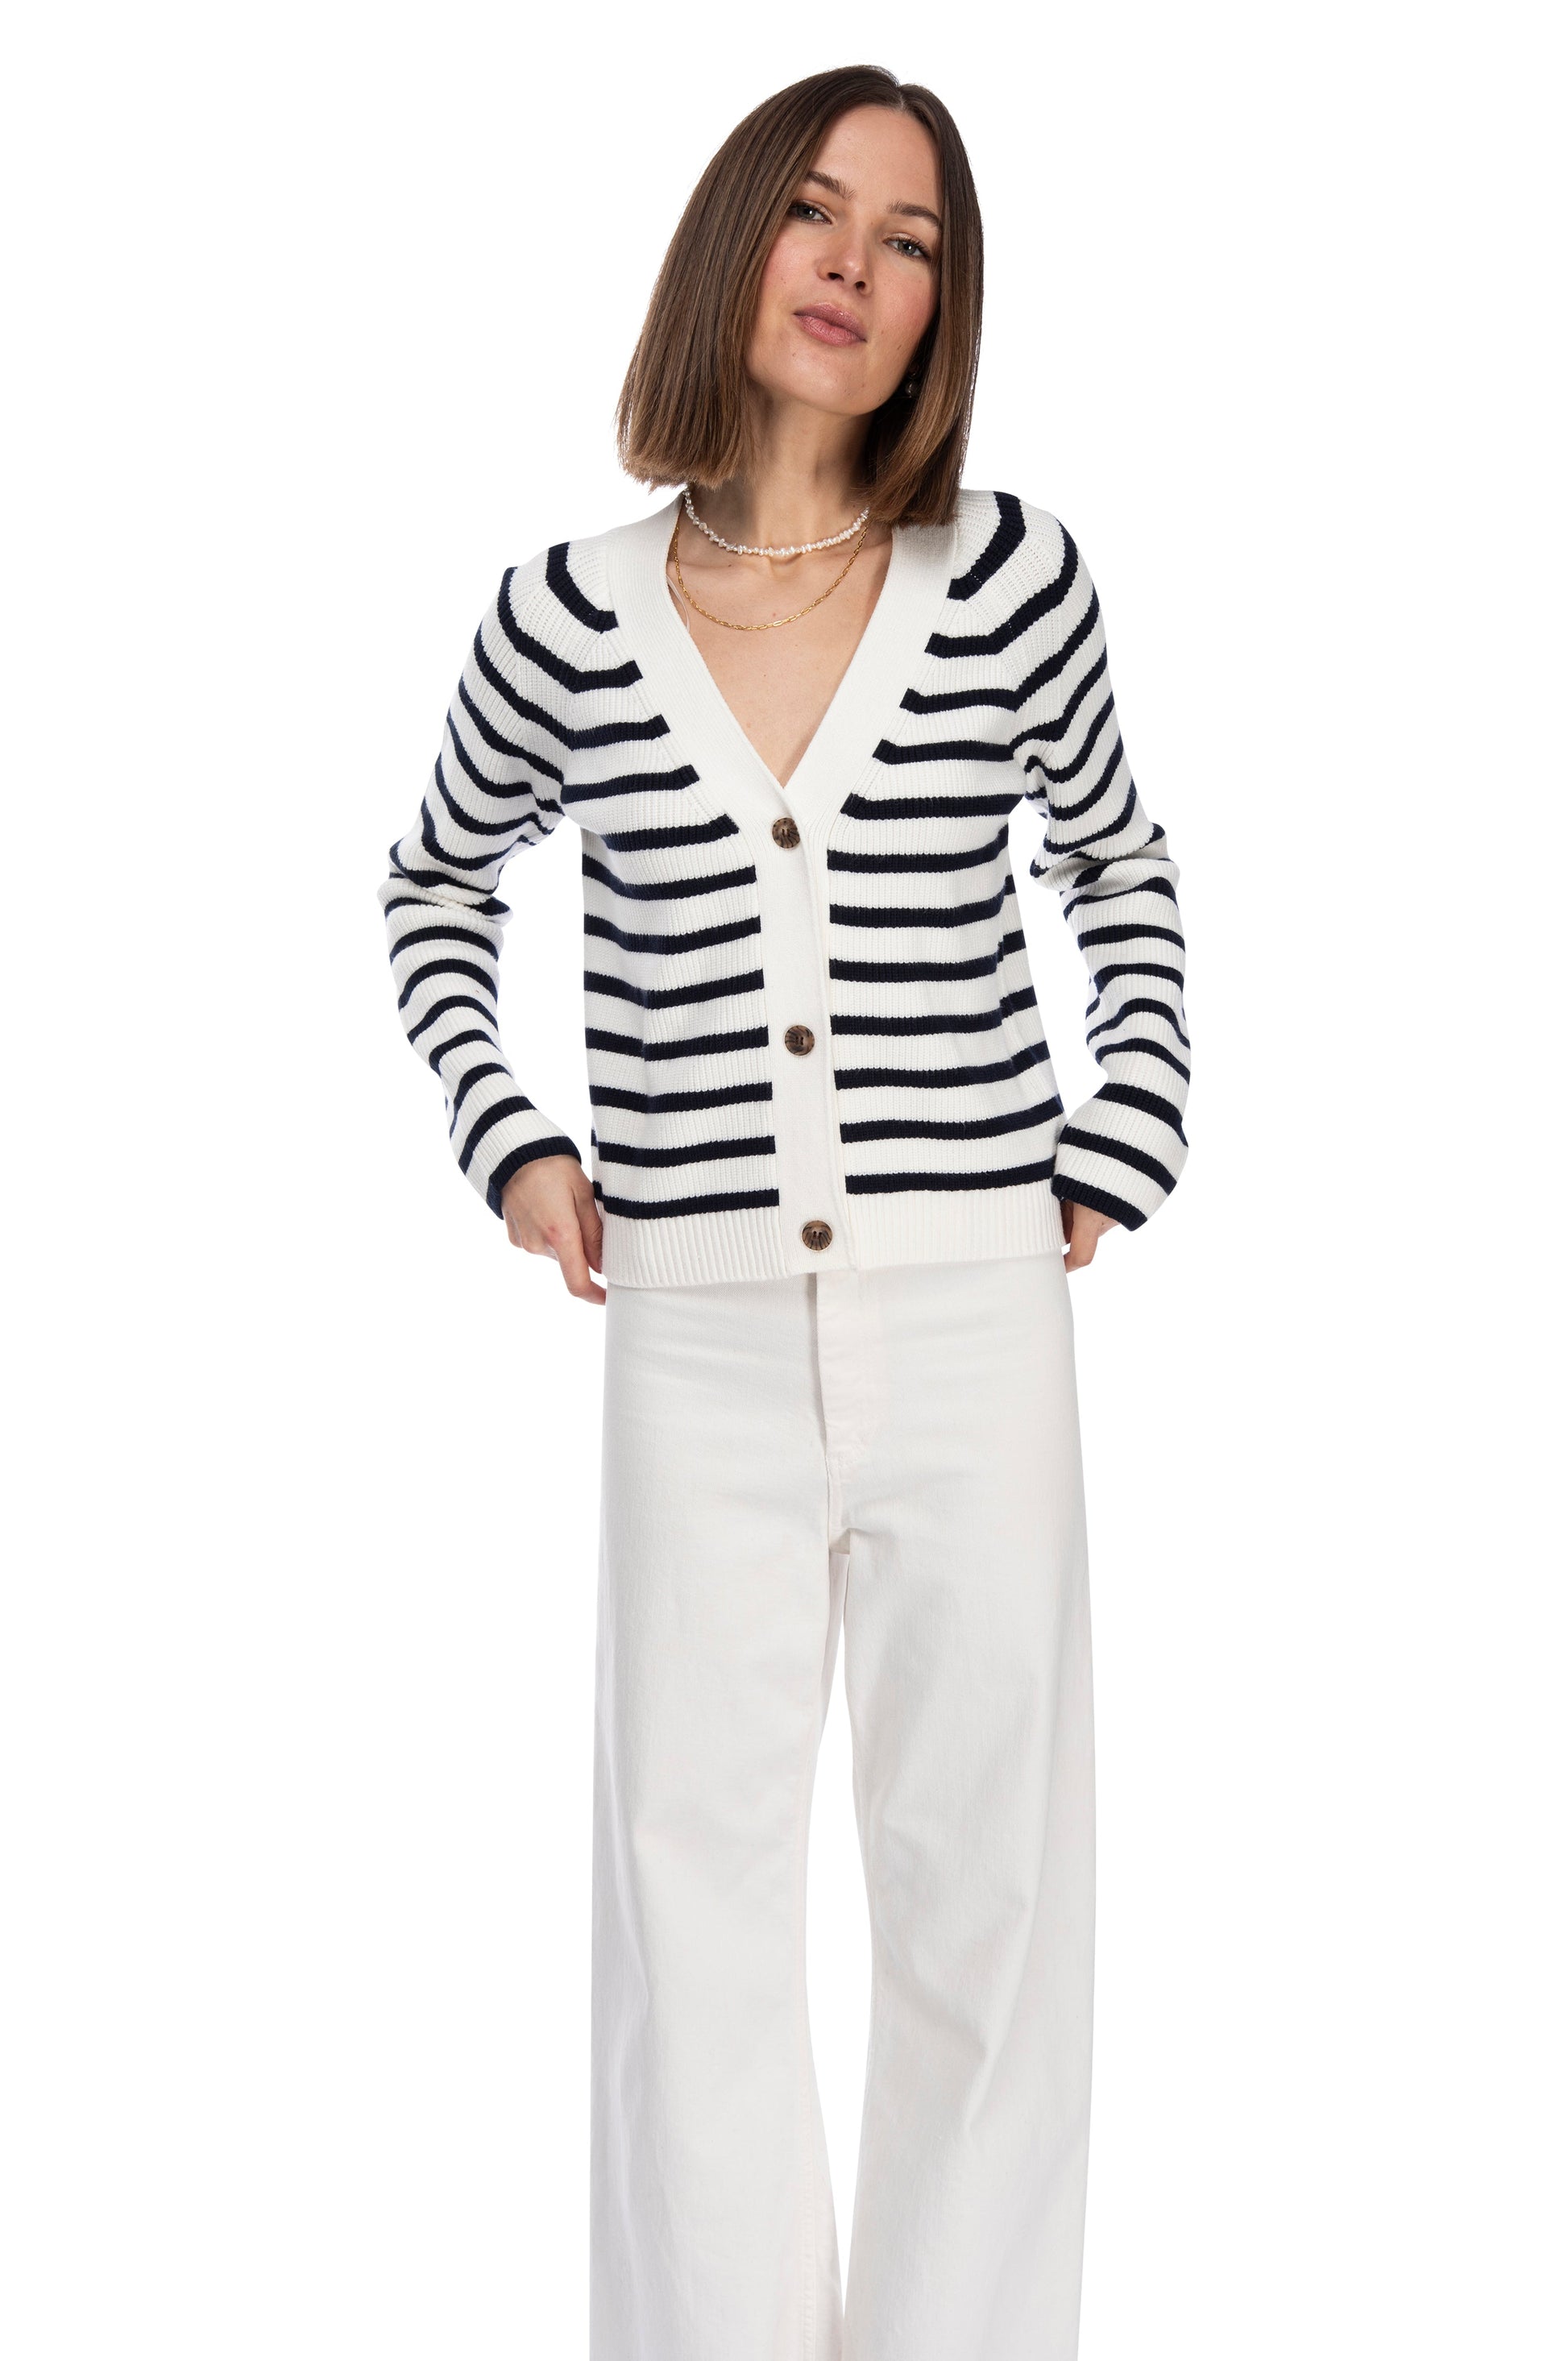 A woman standing confidently, dressed in a chic LS STRIPE CARDIGAN crafted from super soft yarn and white pants against a clean white background by B Collection by Bobeau.